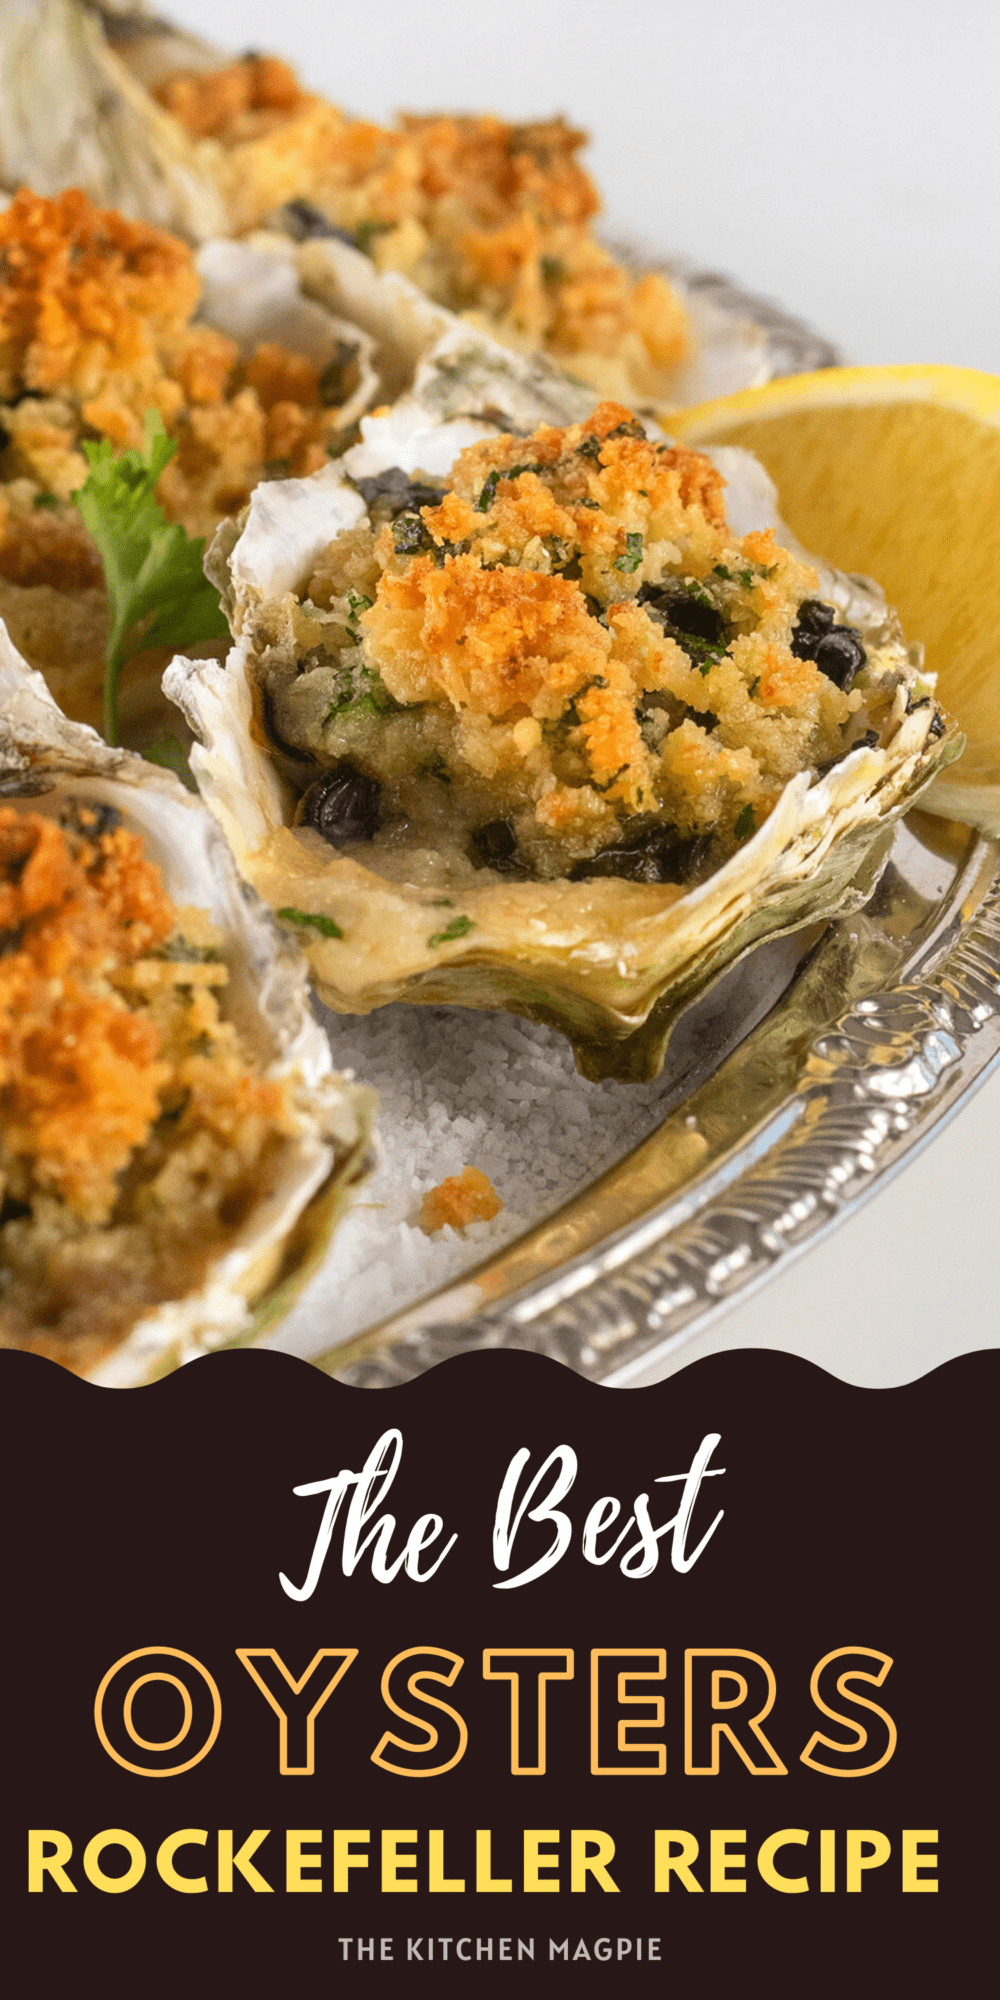 Oysters Rockefeller are so rich and decadent that they were named after the wealthiest man in the country at the time! A special occasion appetizer that is worth sourcing oysters for!